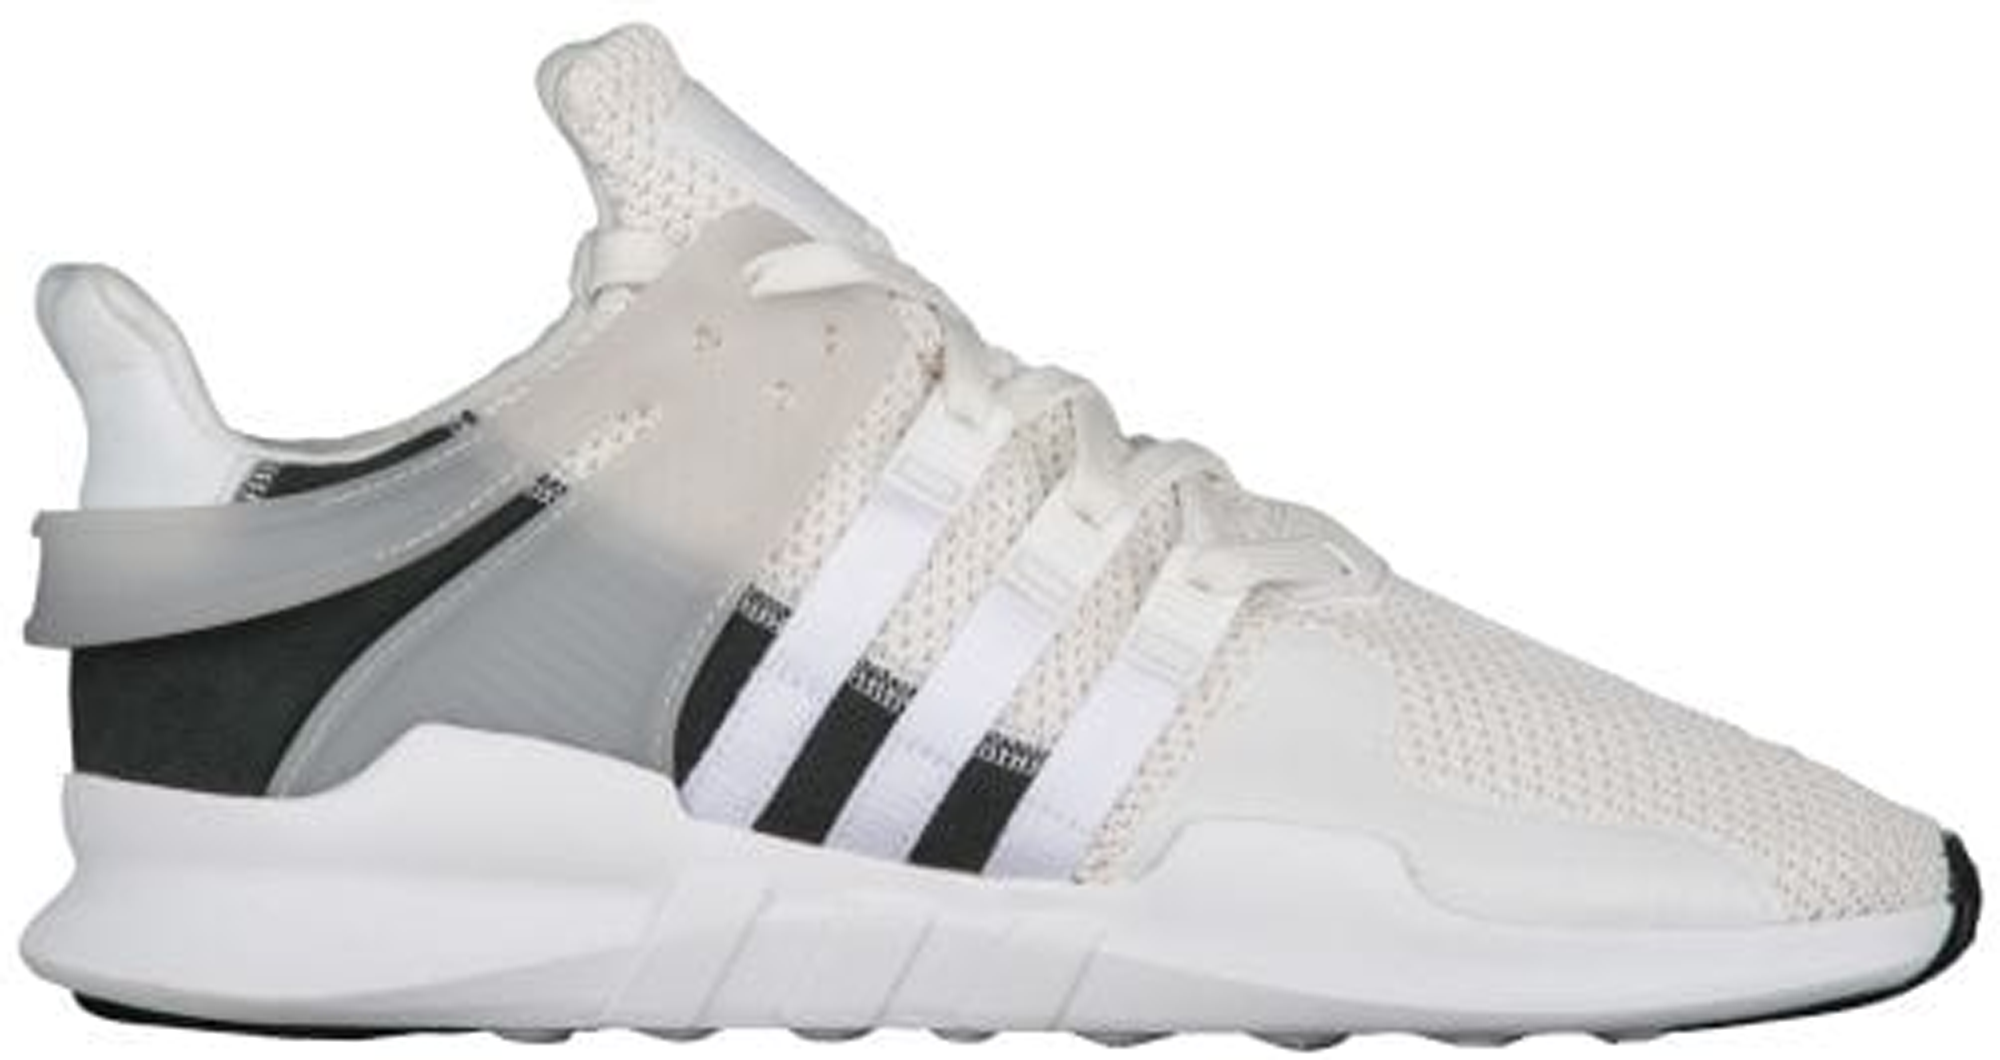 adidas eqt support adv crystal white